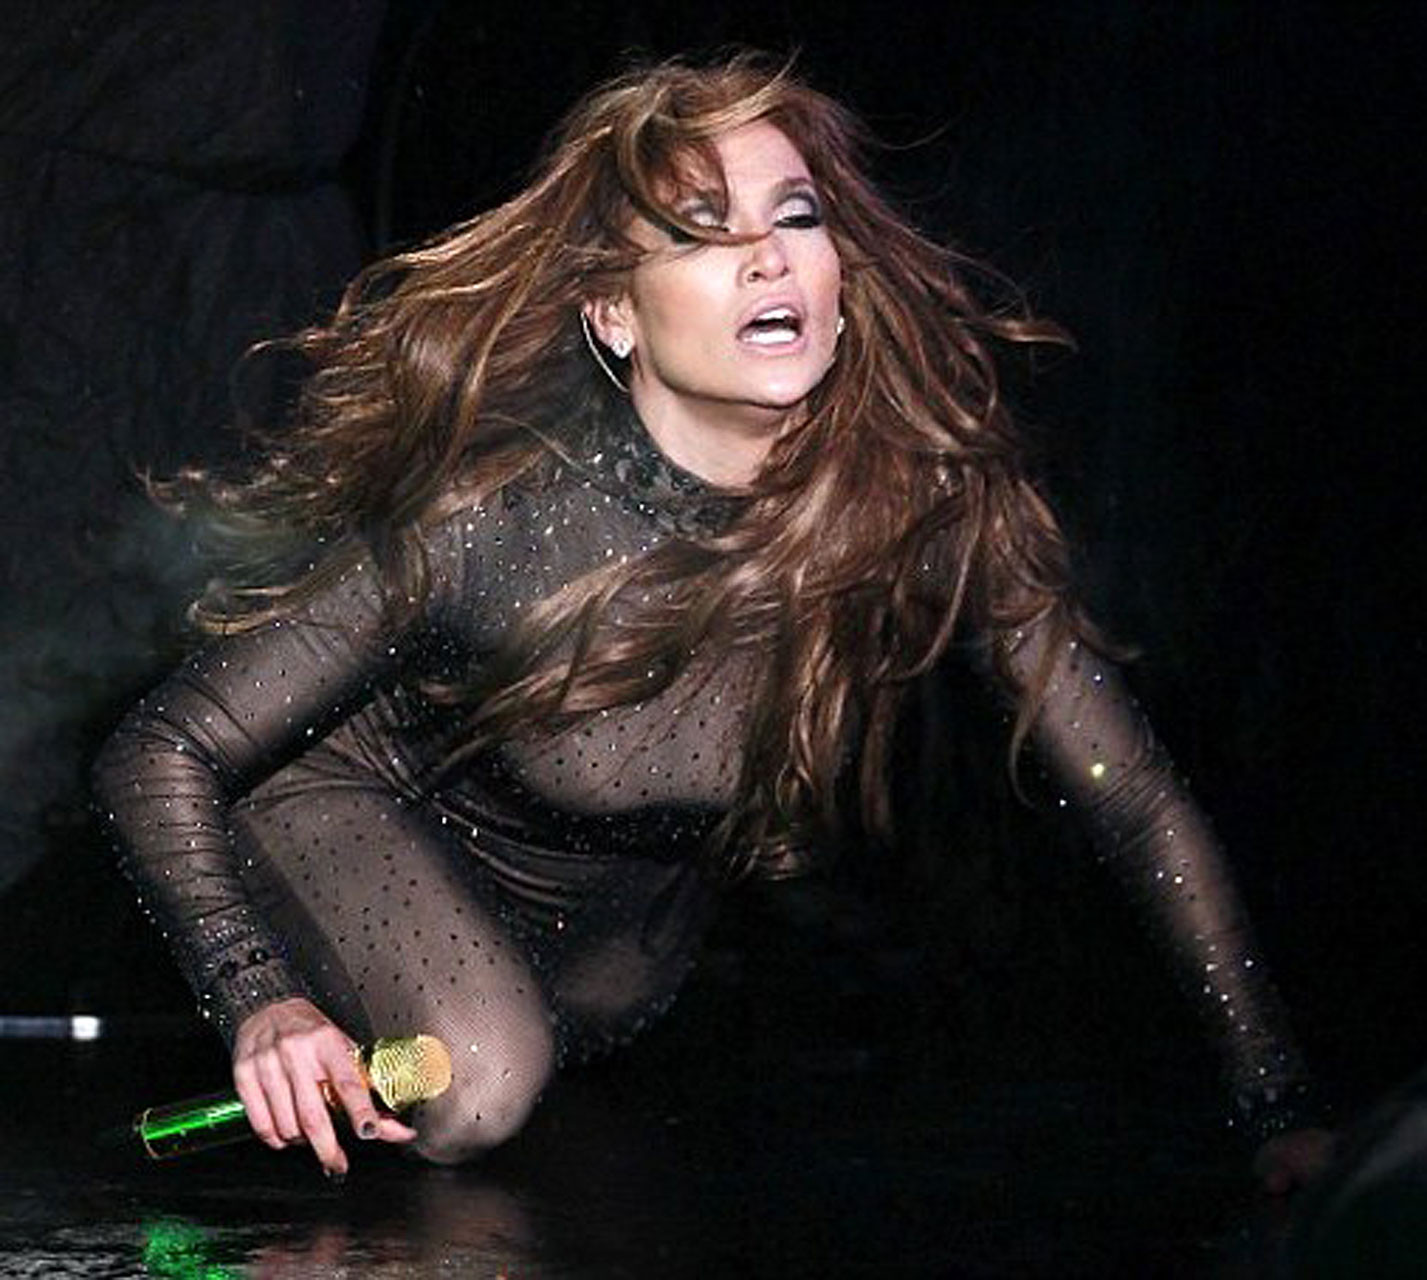 Jennifer Lopez showing her extremely sexy ass and hot body on stage #75365747